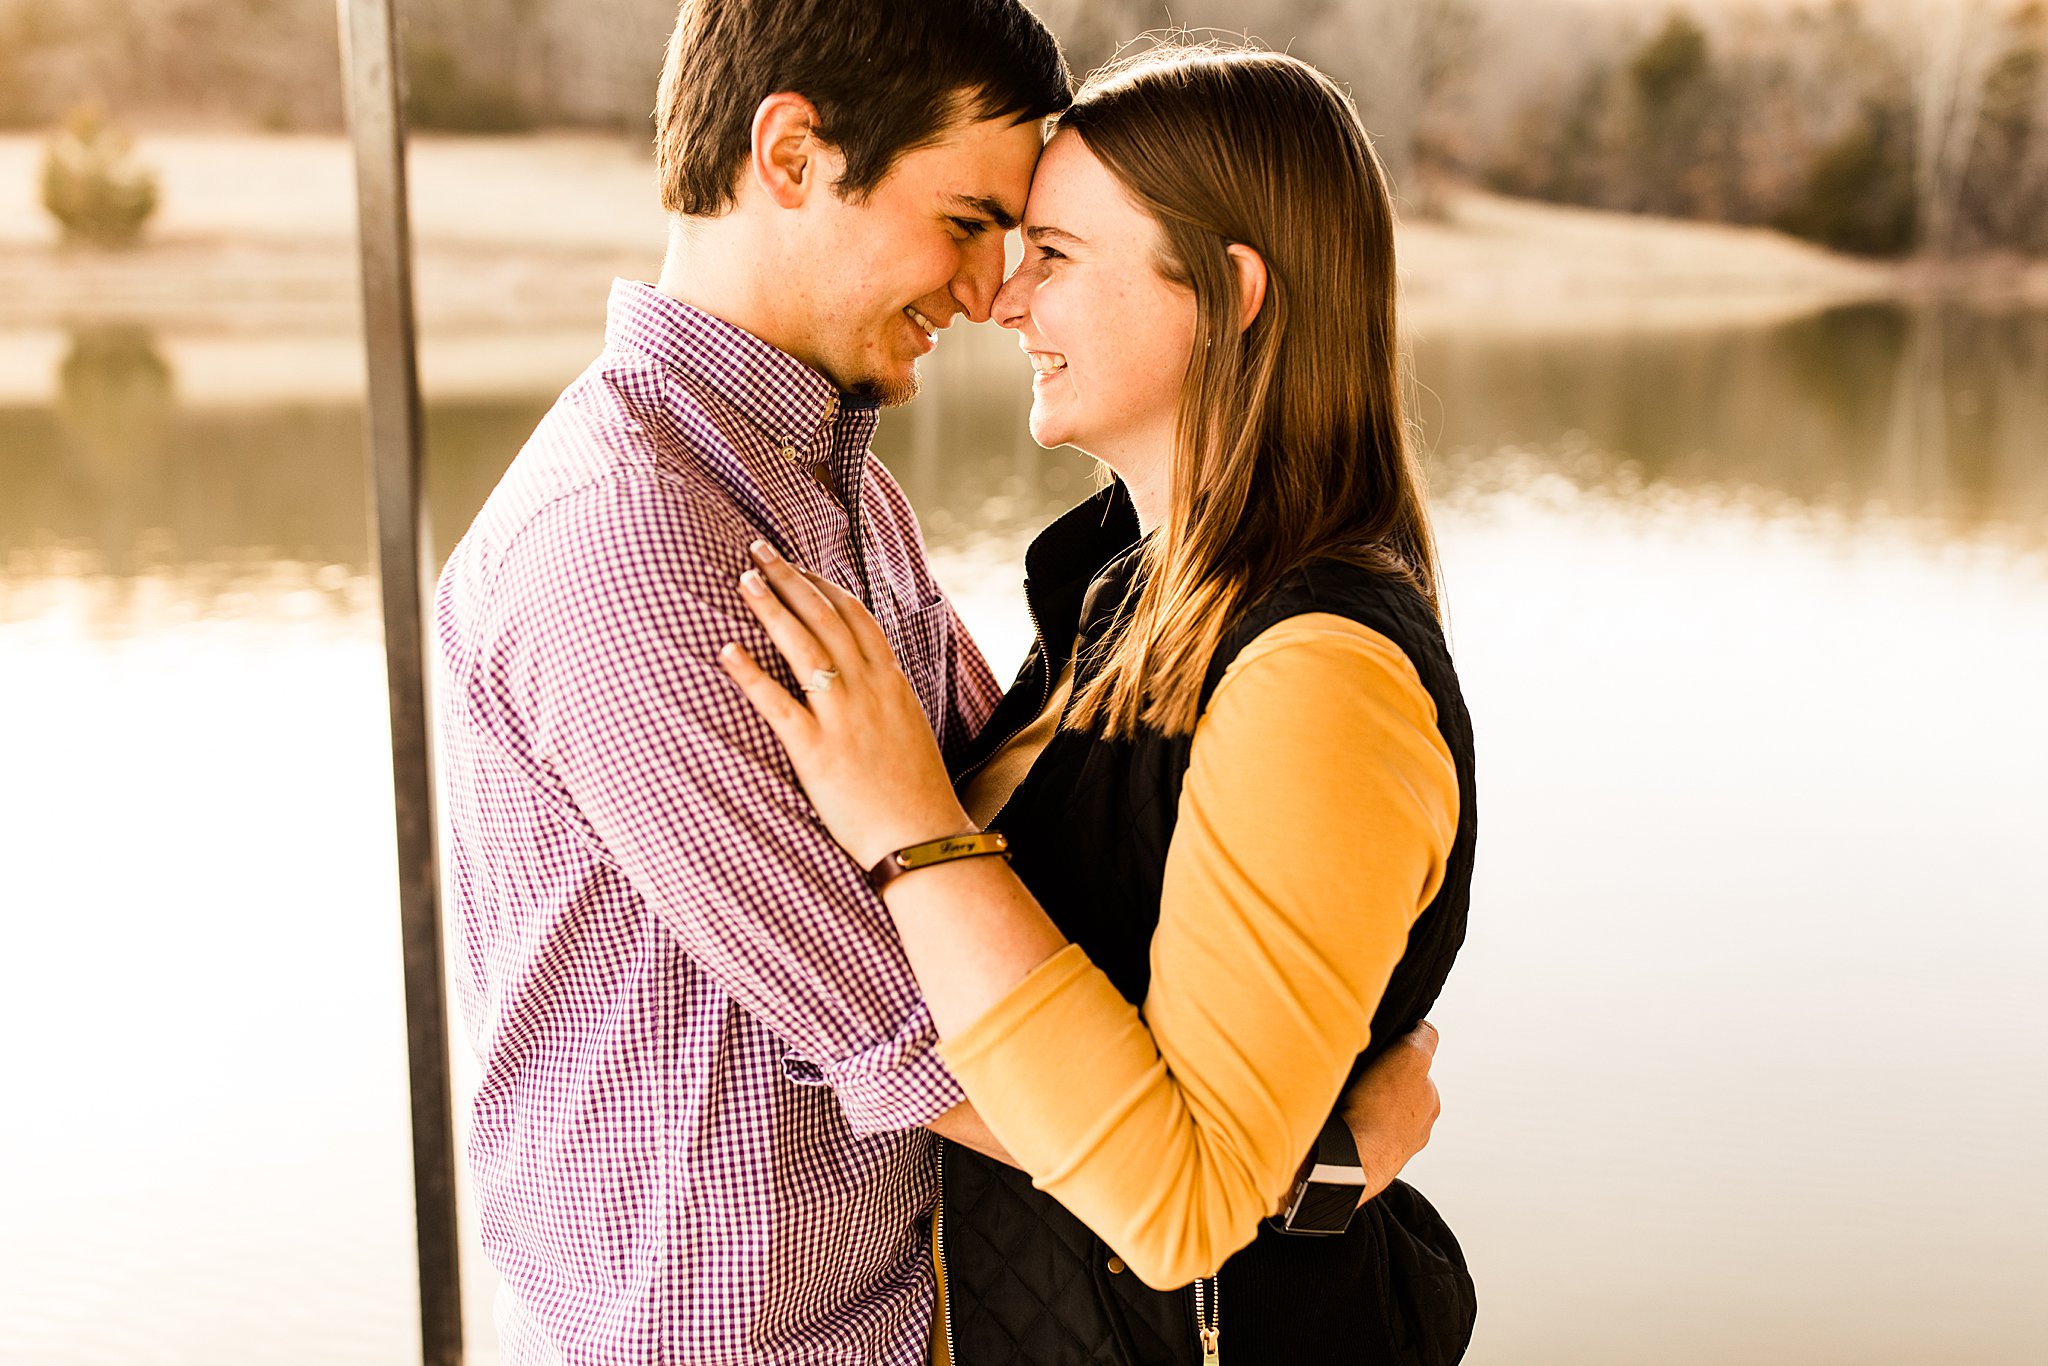 Turkey Hill Bible Camp, Midwest Engagement Session